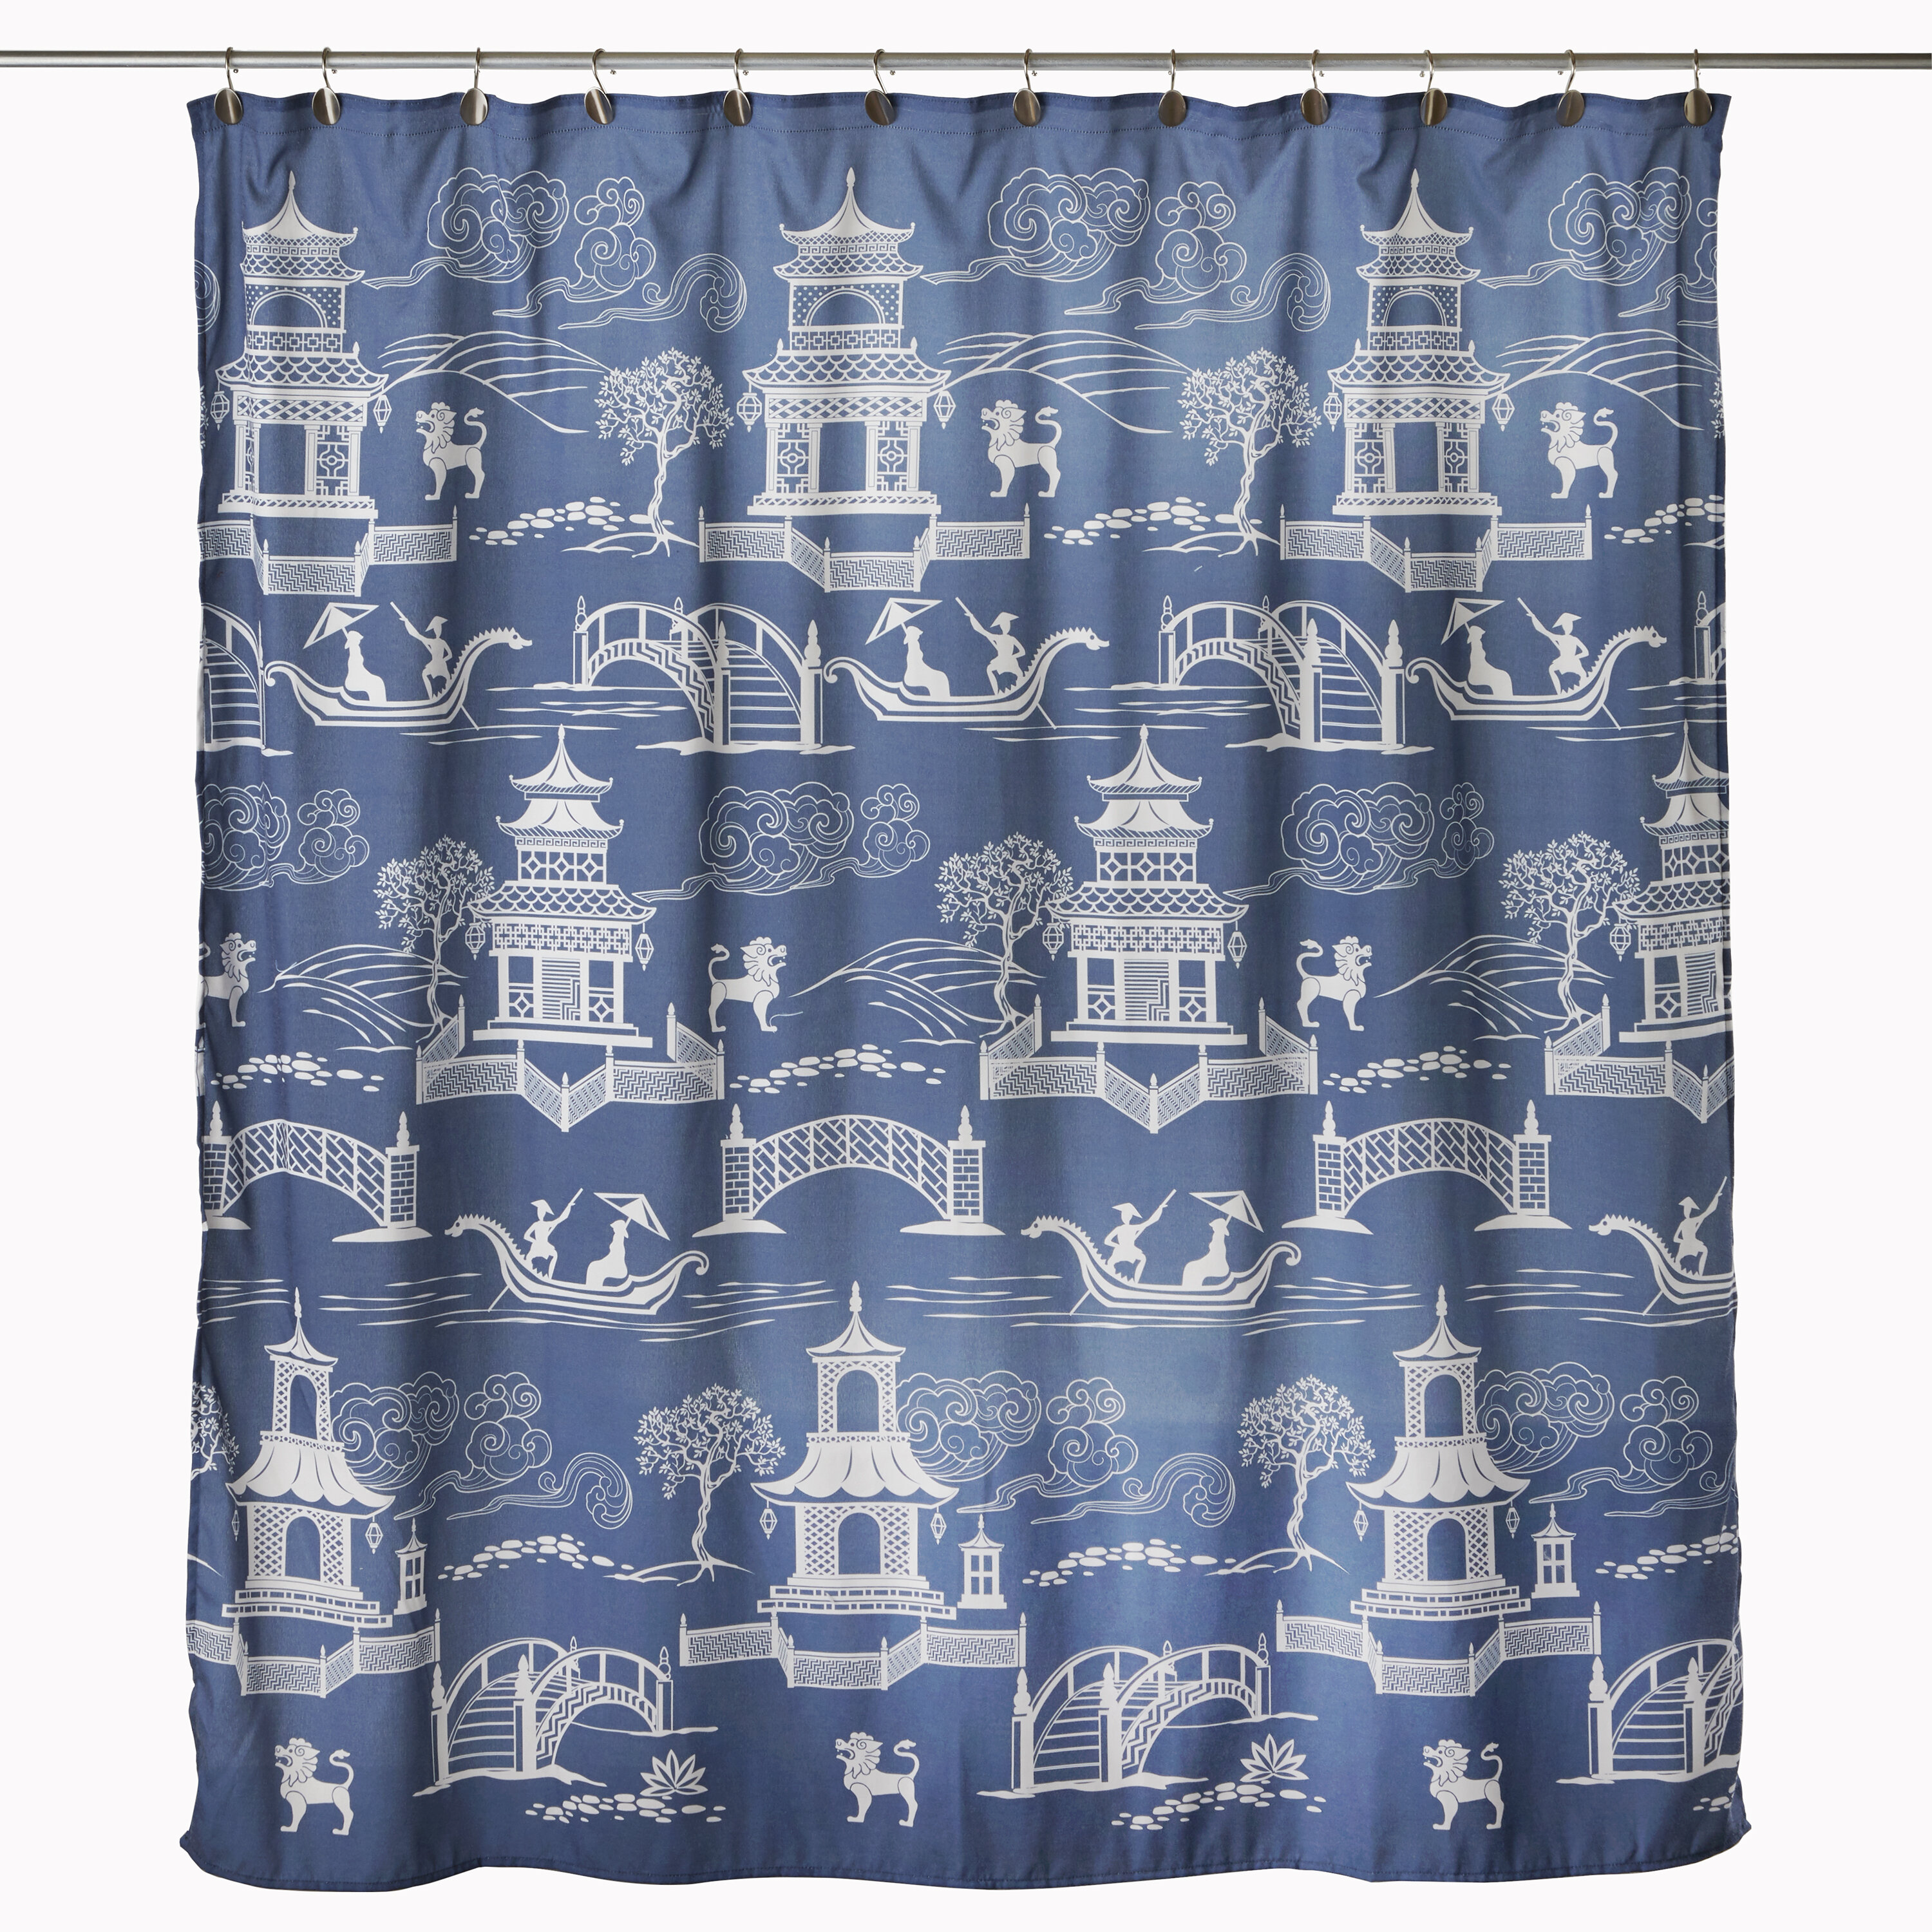 Vern Yip By Skl Home Chinoiserie Shower Curtain In Blue